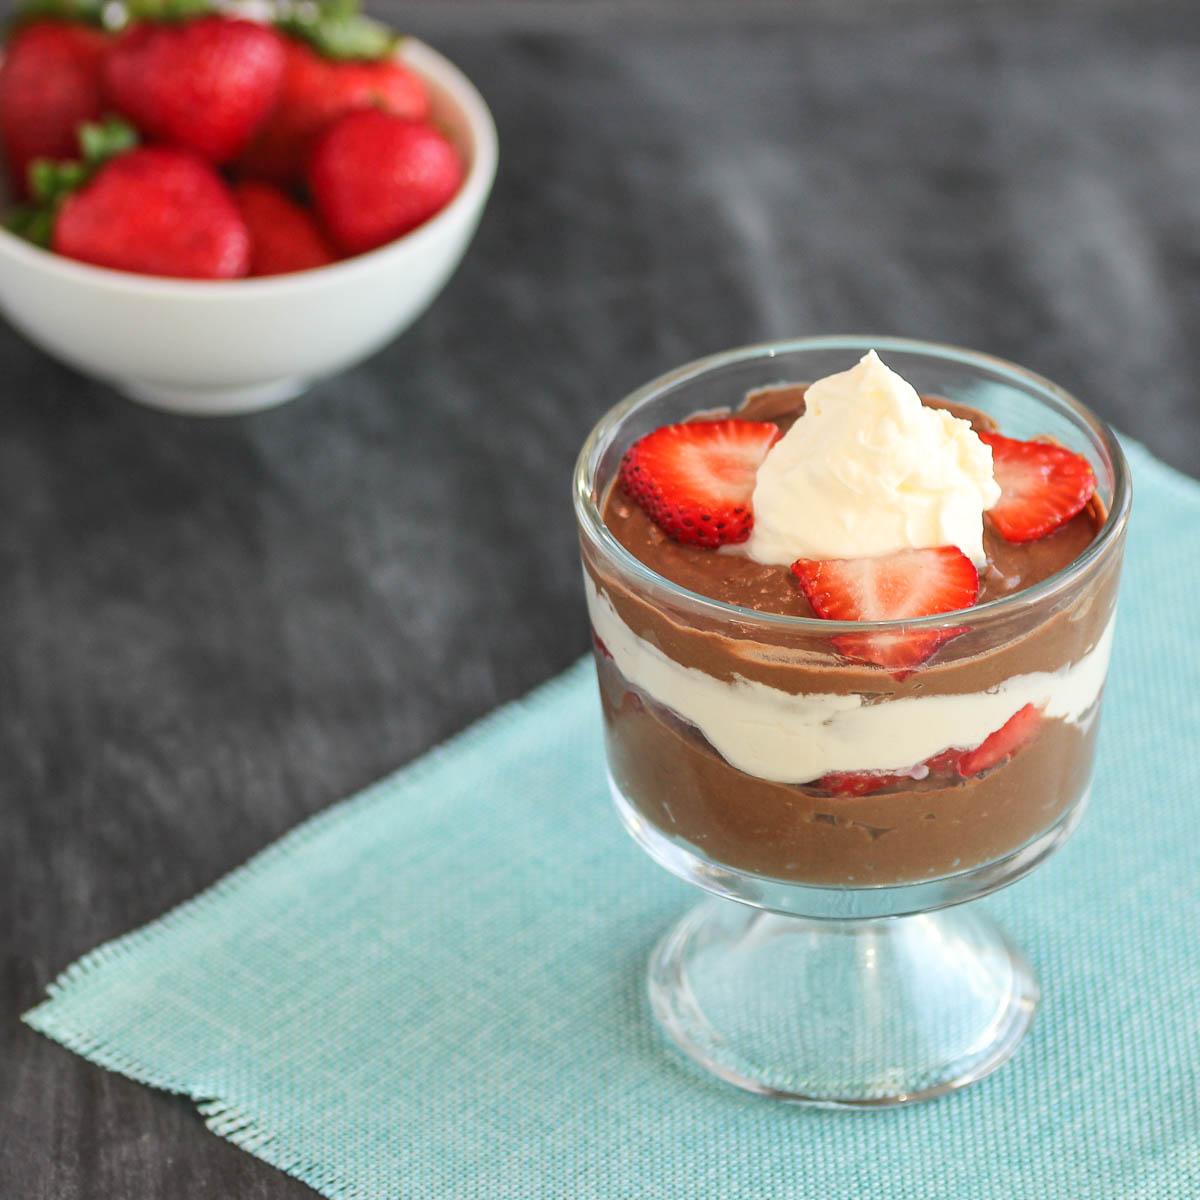 A creamy chocolate pudding with whipped cream and slice strawberry parfait.